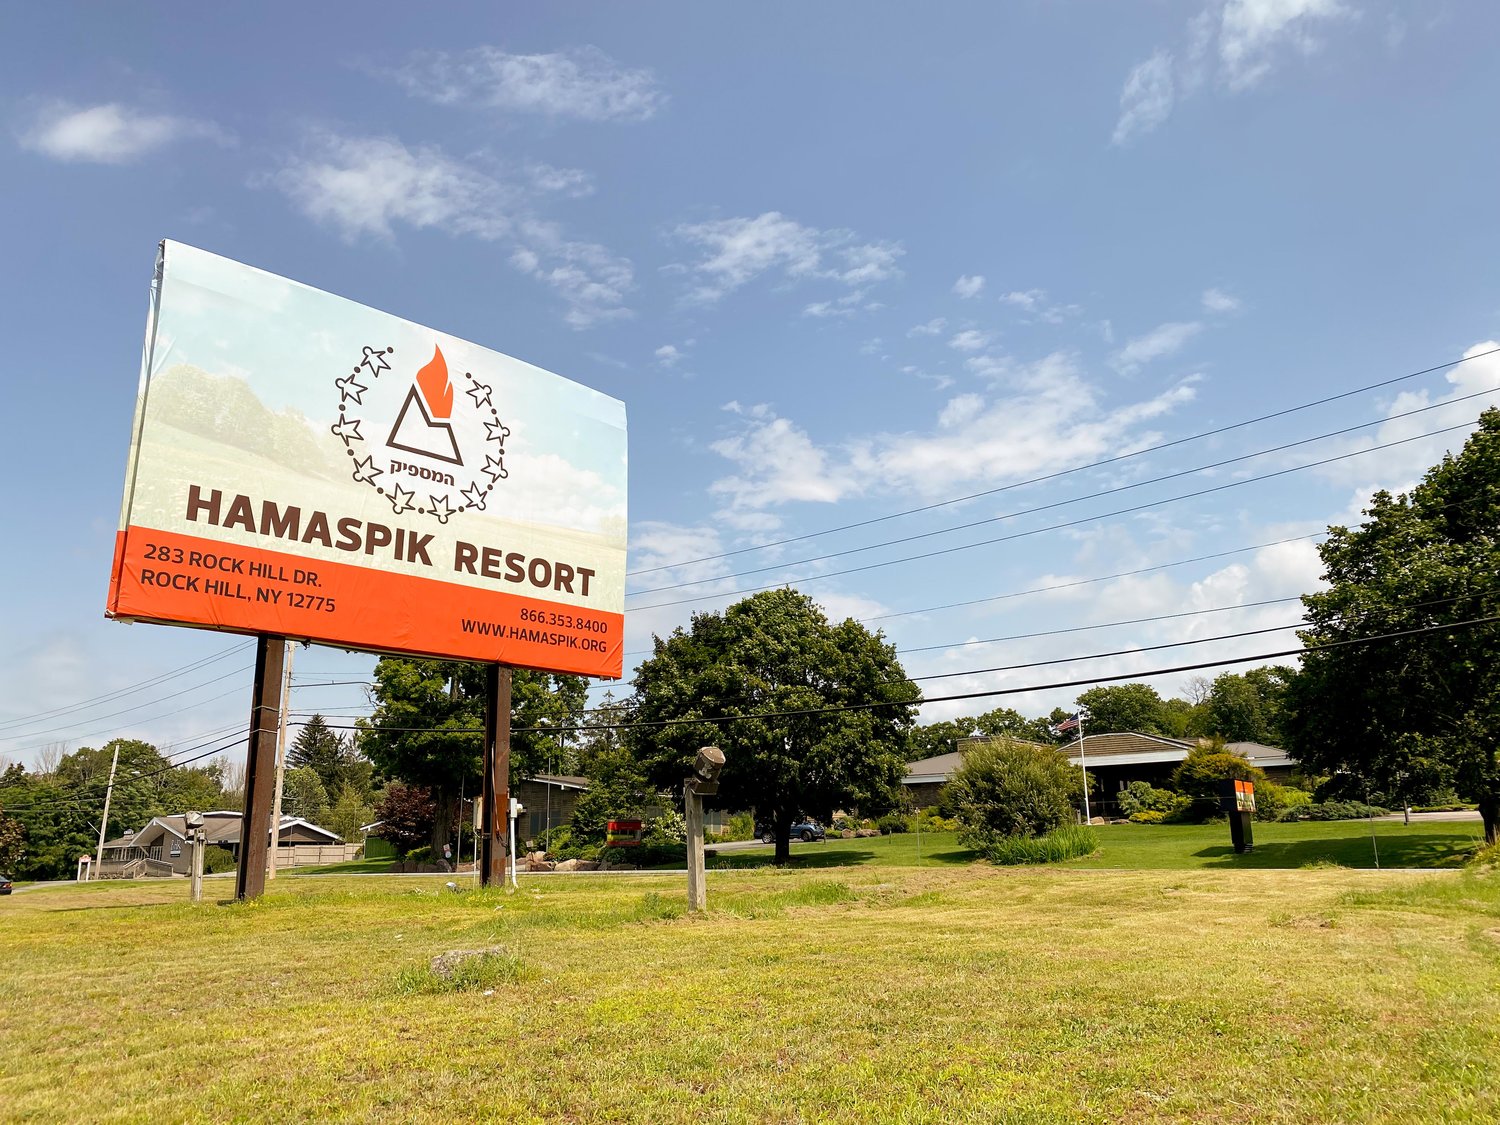 A public hearing has been set for  August 4, 2021, at 7:30 p.m at Thompson Town Hall for the Hamaspik Resort project in Rock Hill at the former Ramada Inn.